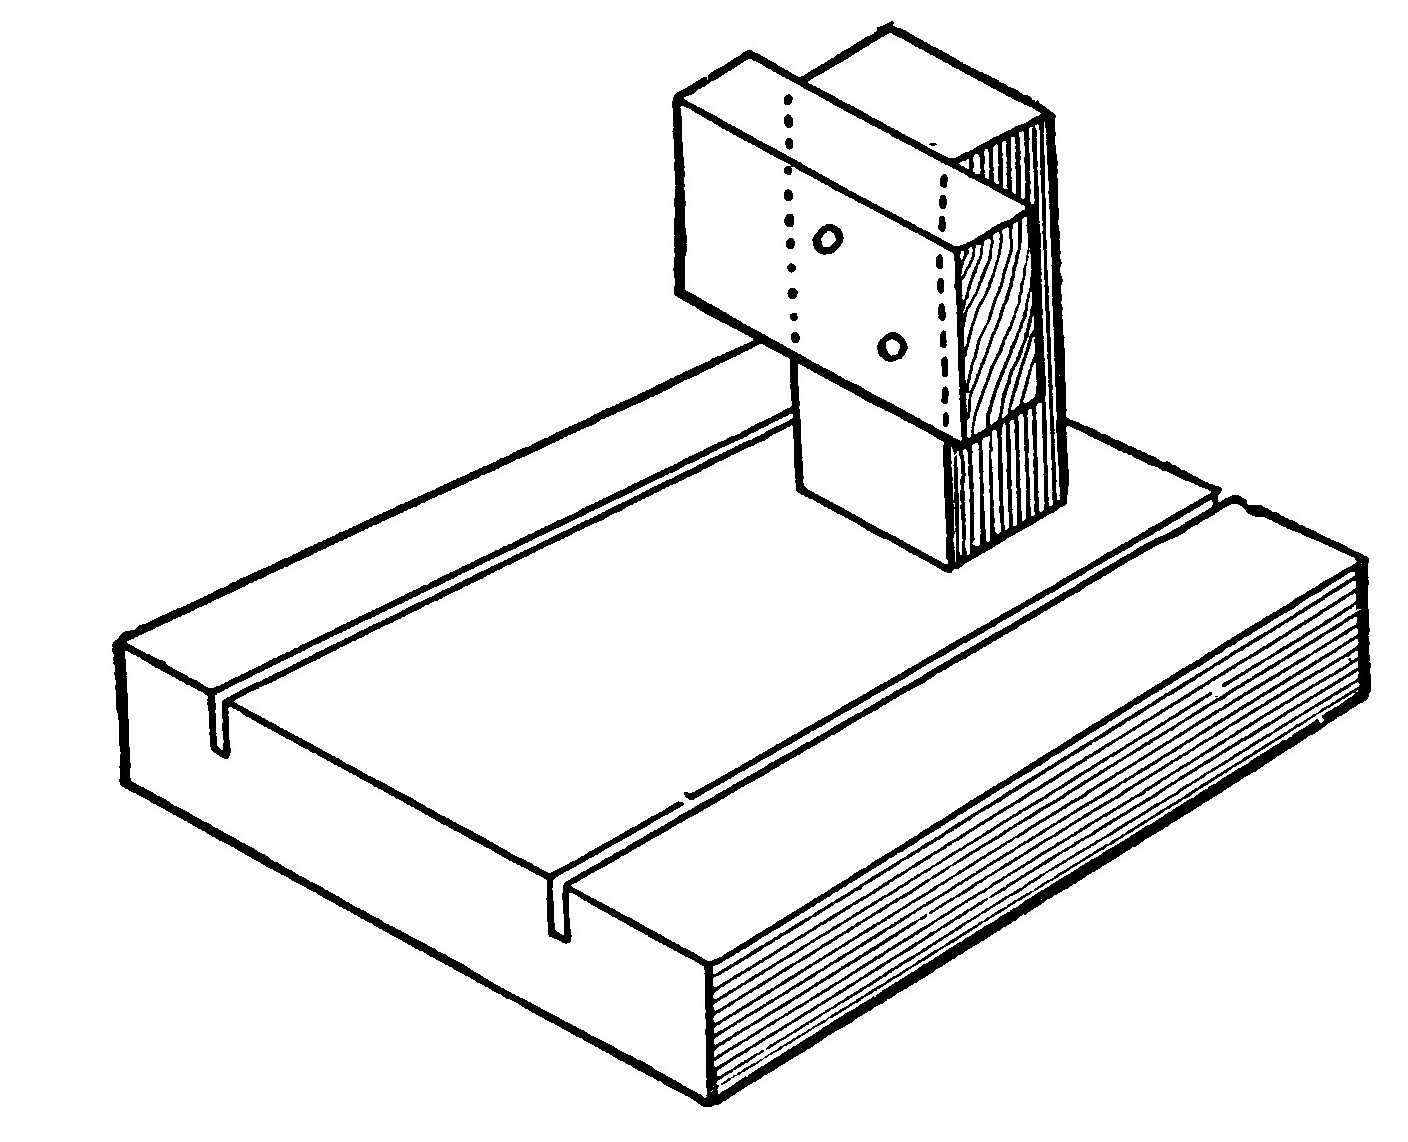 Fig. 278.—A Bumper for preventing the Car from leaving the Rails.